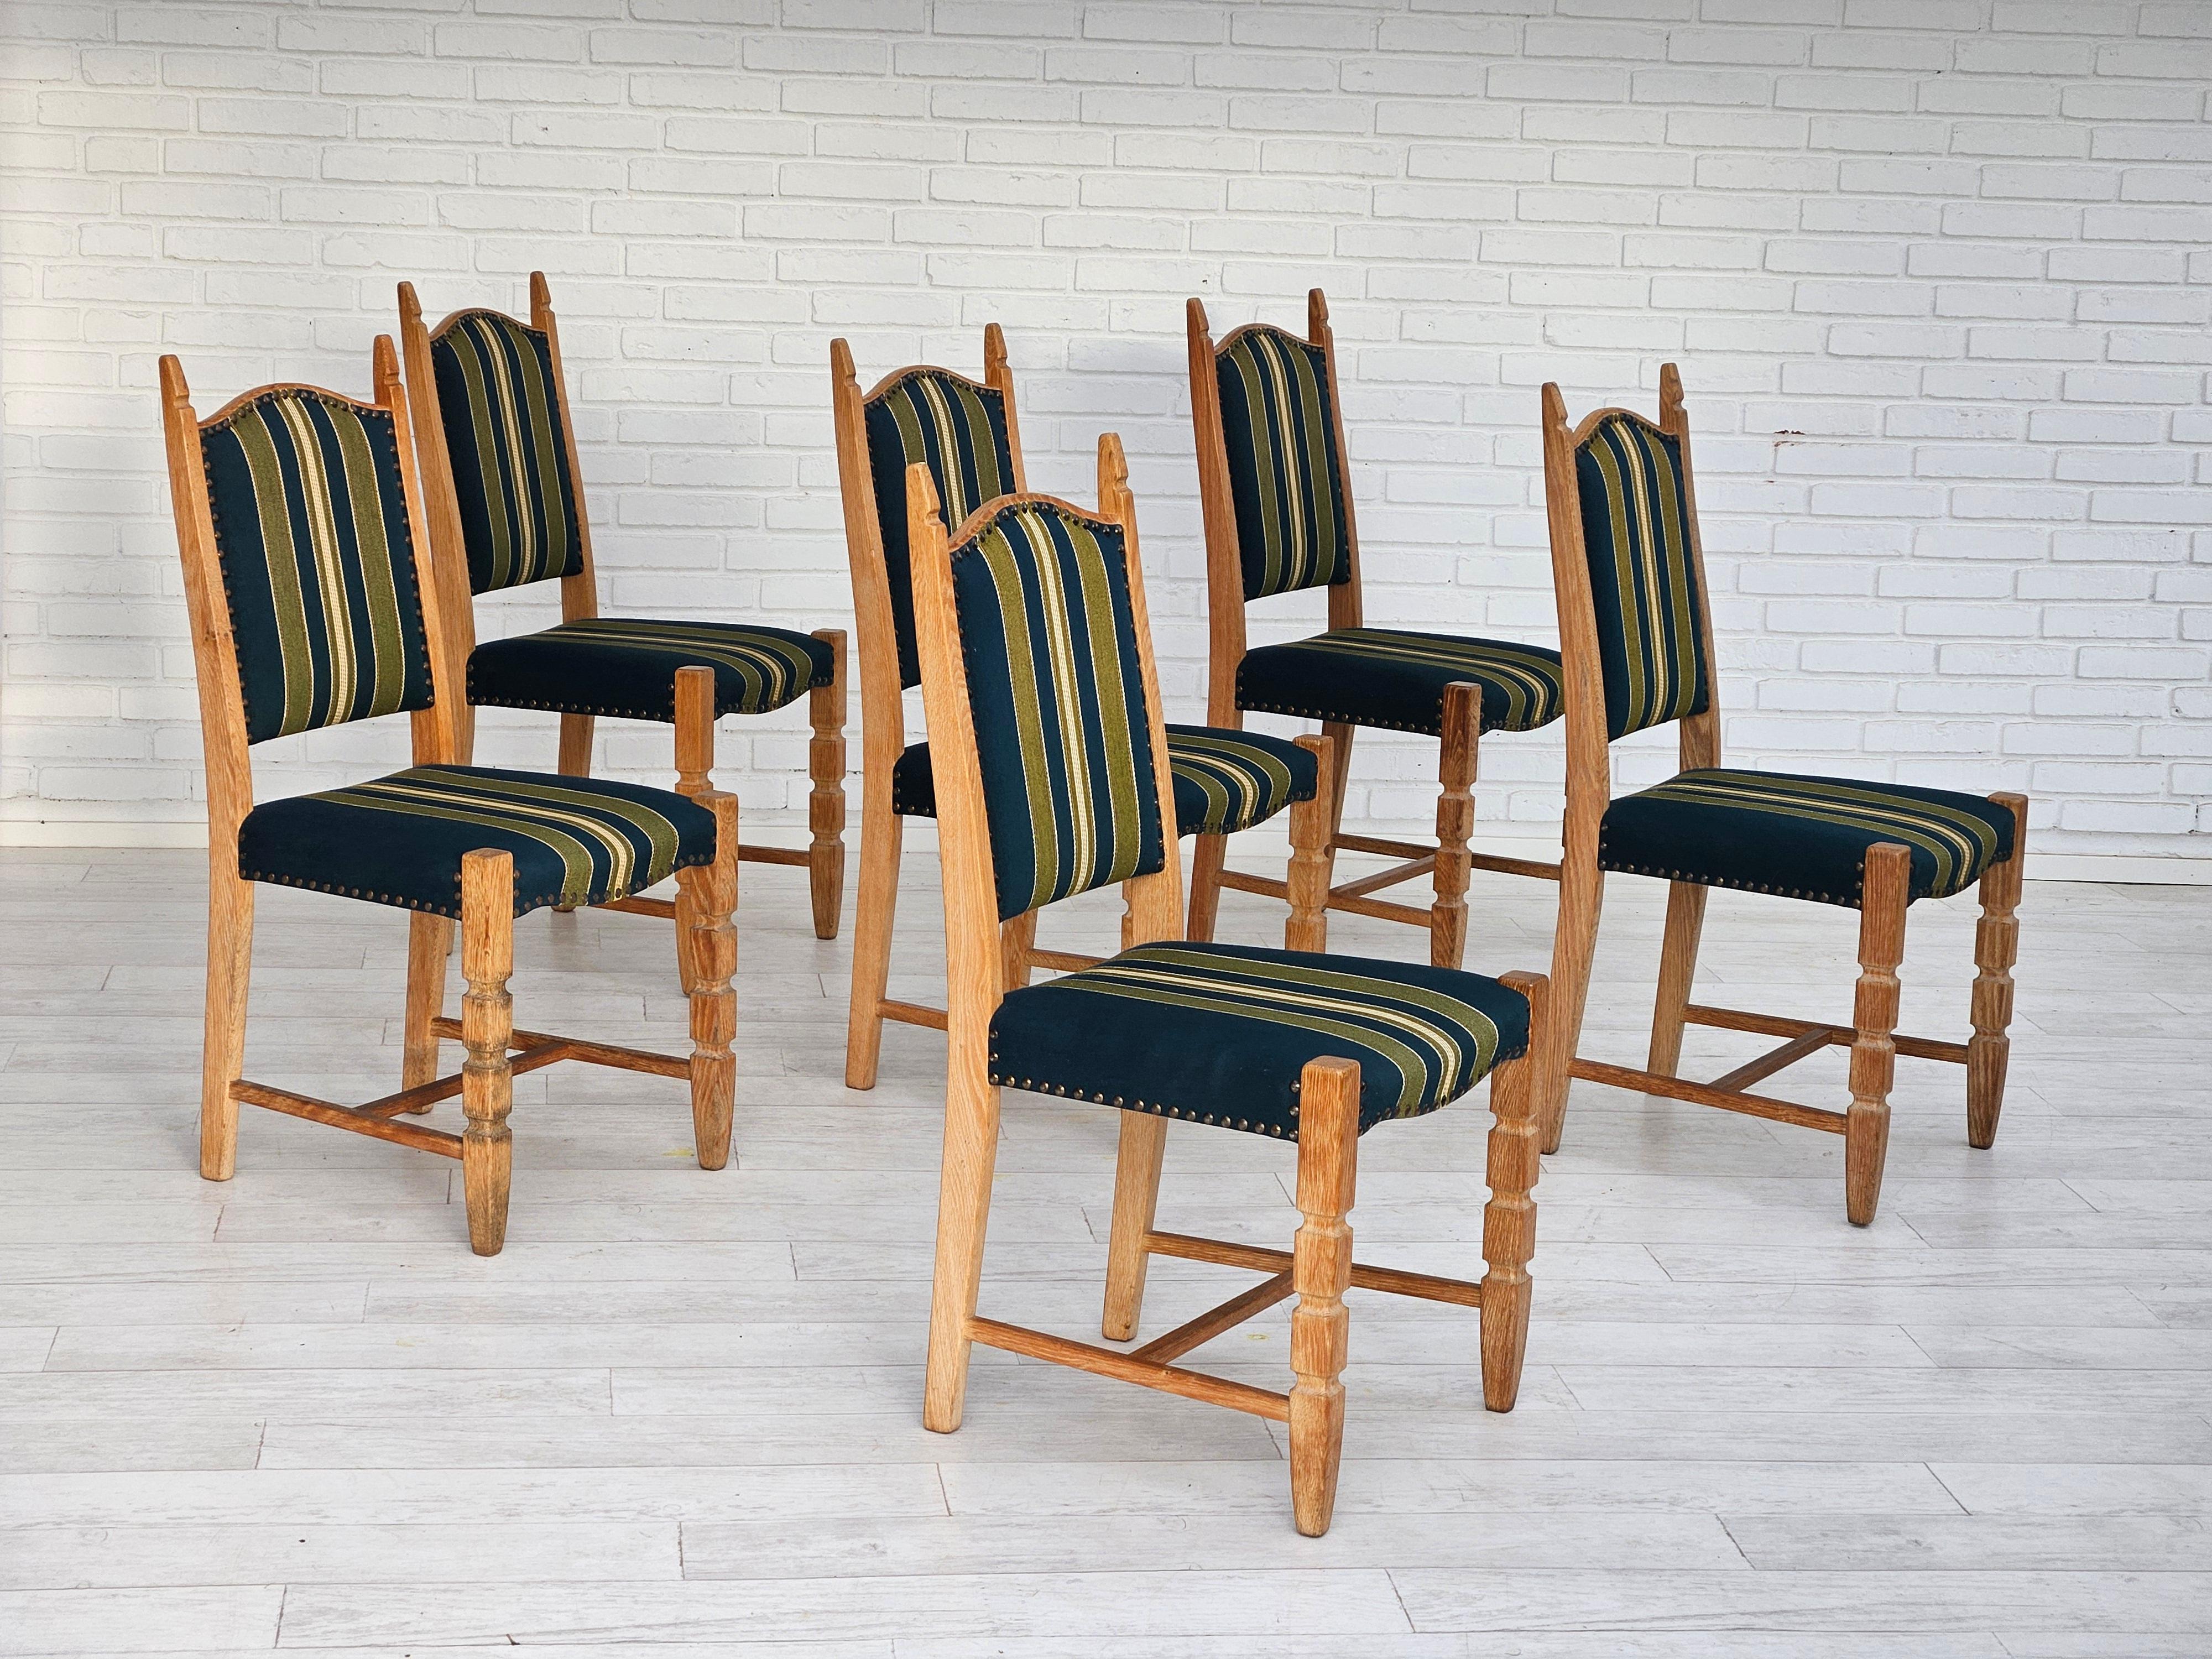 1970s, set of 6 pcs Danish dining chairs. Original very good condition: no smells and no stains. Furniture wool fabric, oak wood. Manufactured by Danish furniture manufacturer in about 1970s.